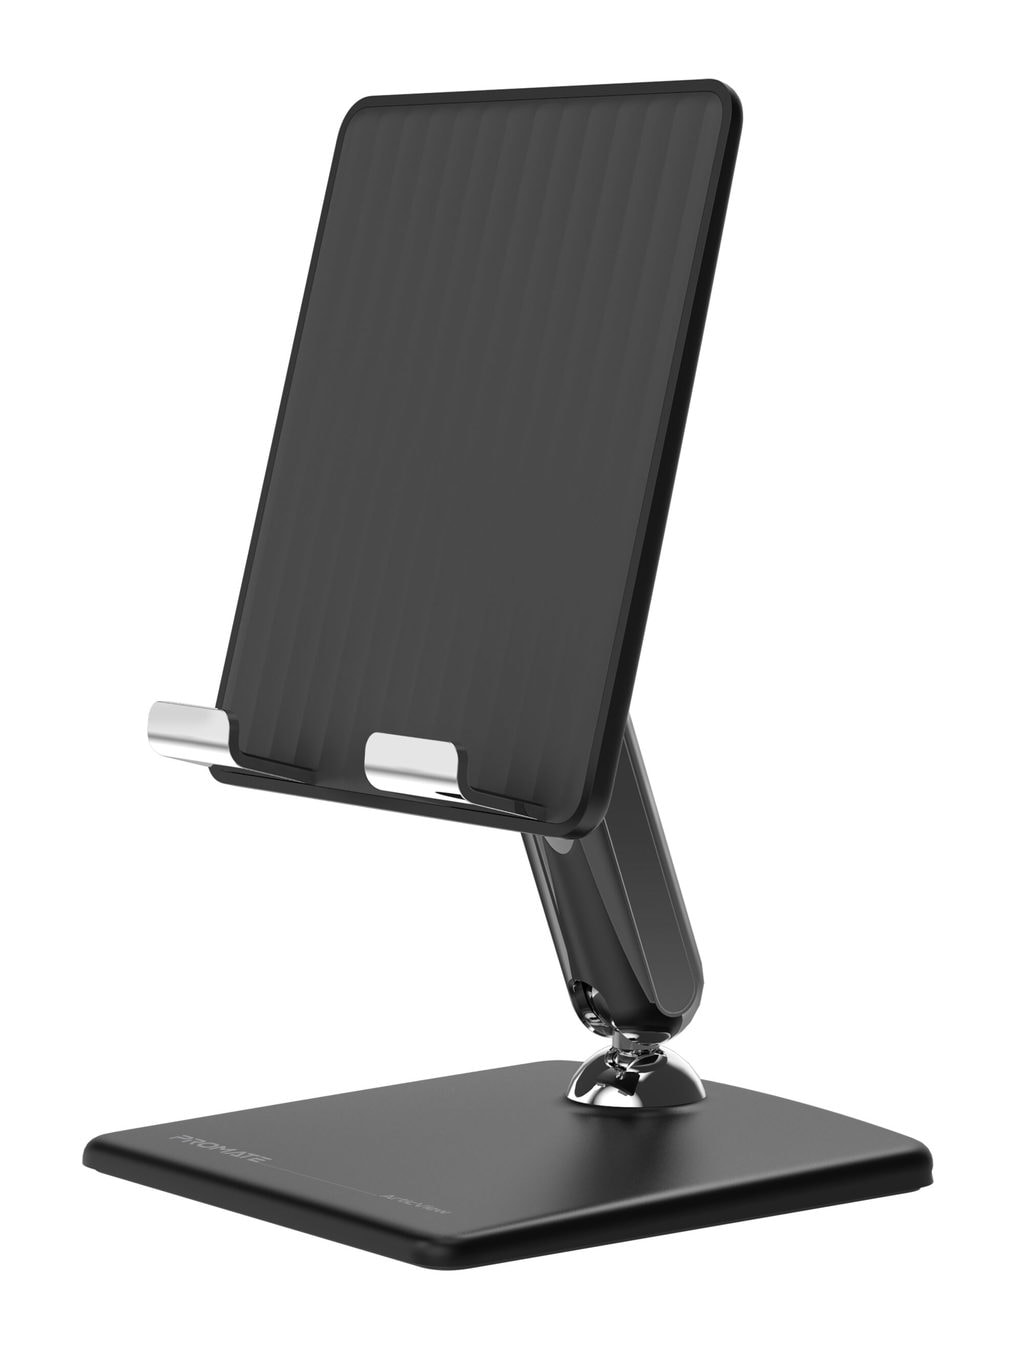 Promate Tablet Stand, Universal Multi-Angle Desk Tablet/Phone Holder with Anti-Slip Base and Foldable Ergonomic Design for iPad Pro/Mini, Nintendo Switch, iPhone 12 Pro, Galaxy 21, Kindle, ArticView Black